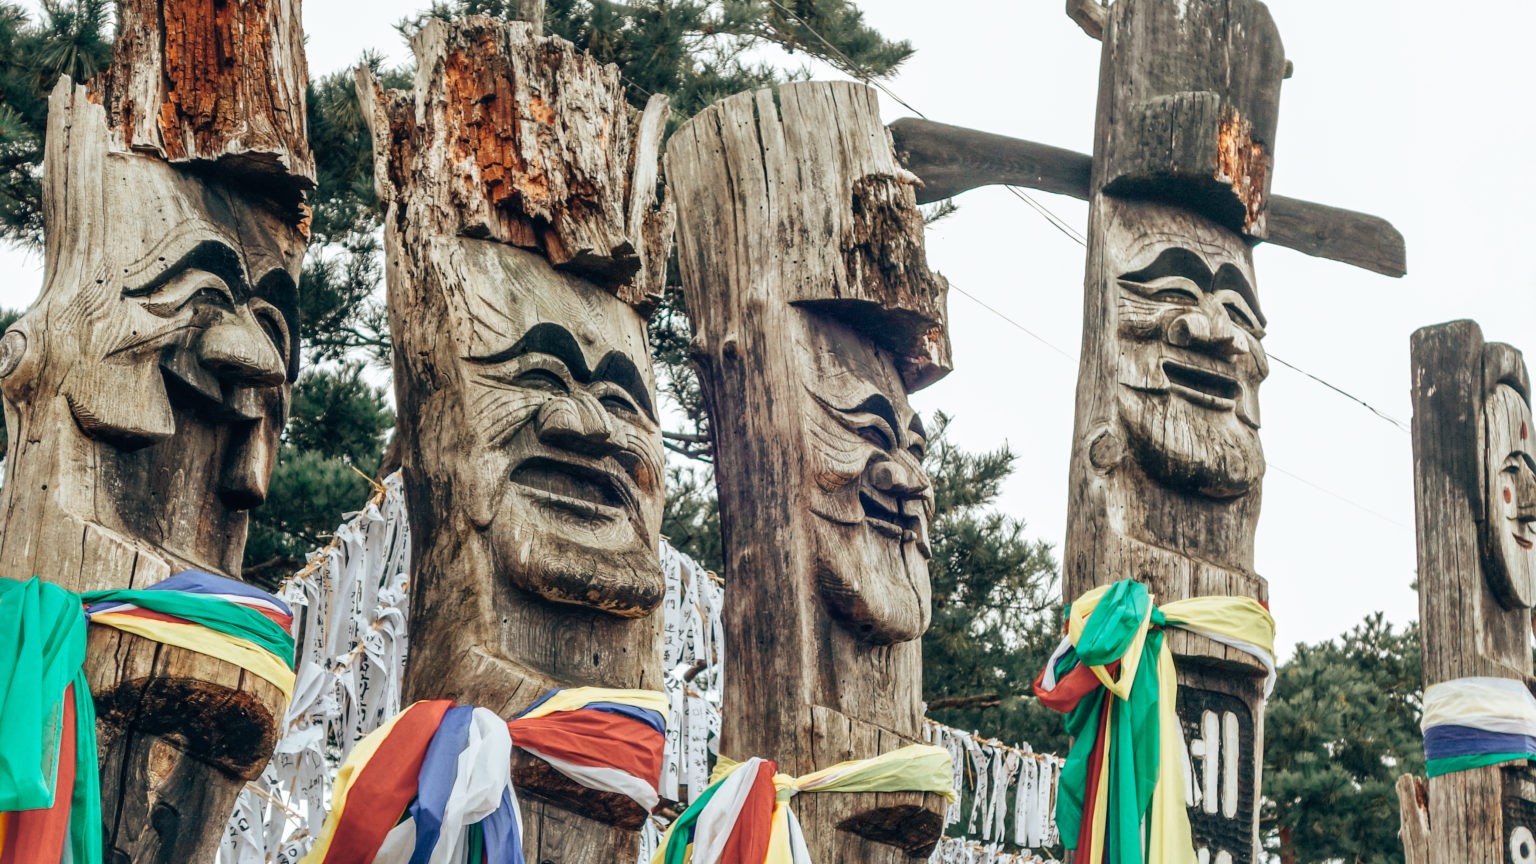 Everything to know about the Andong Mask Dance festival in Korea